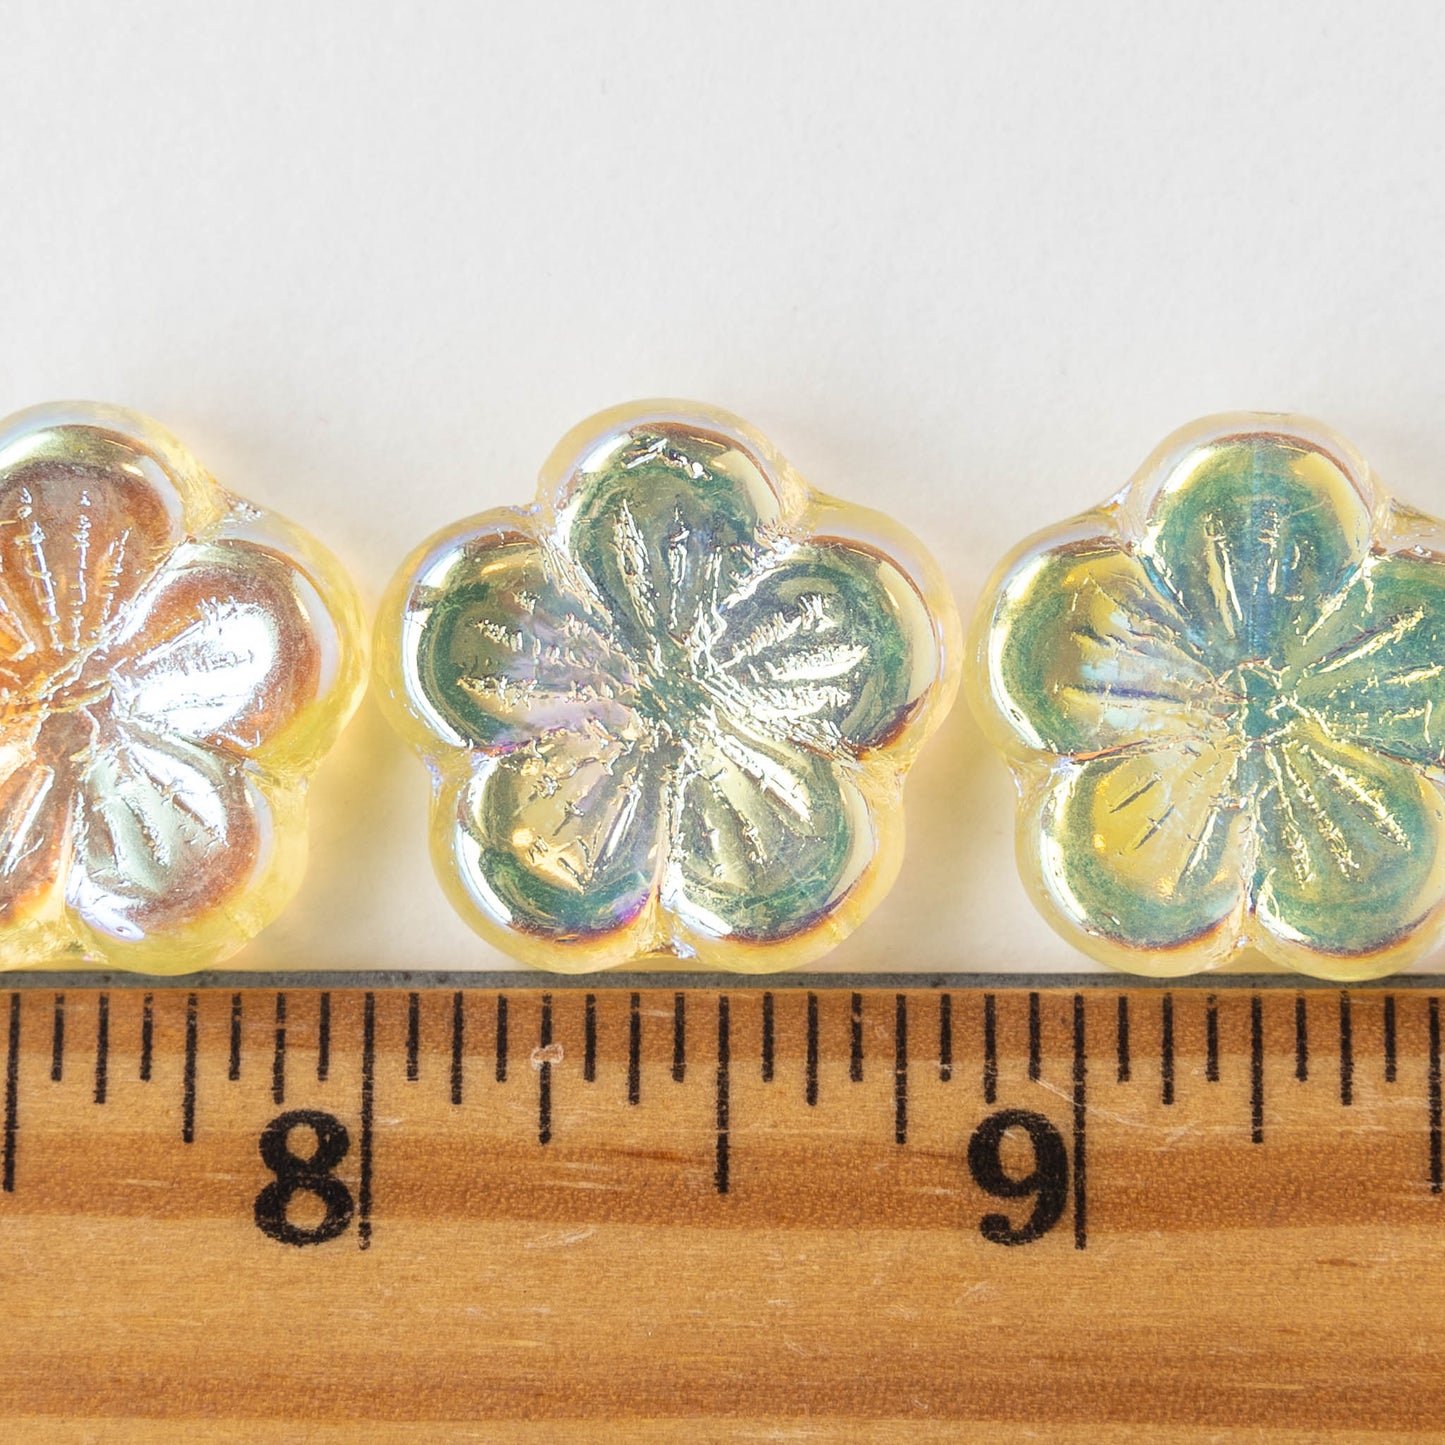 Load image into Gallery viewer, 20mm Flower - Mellow Yellow AB - 10 beads
